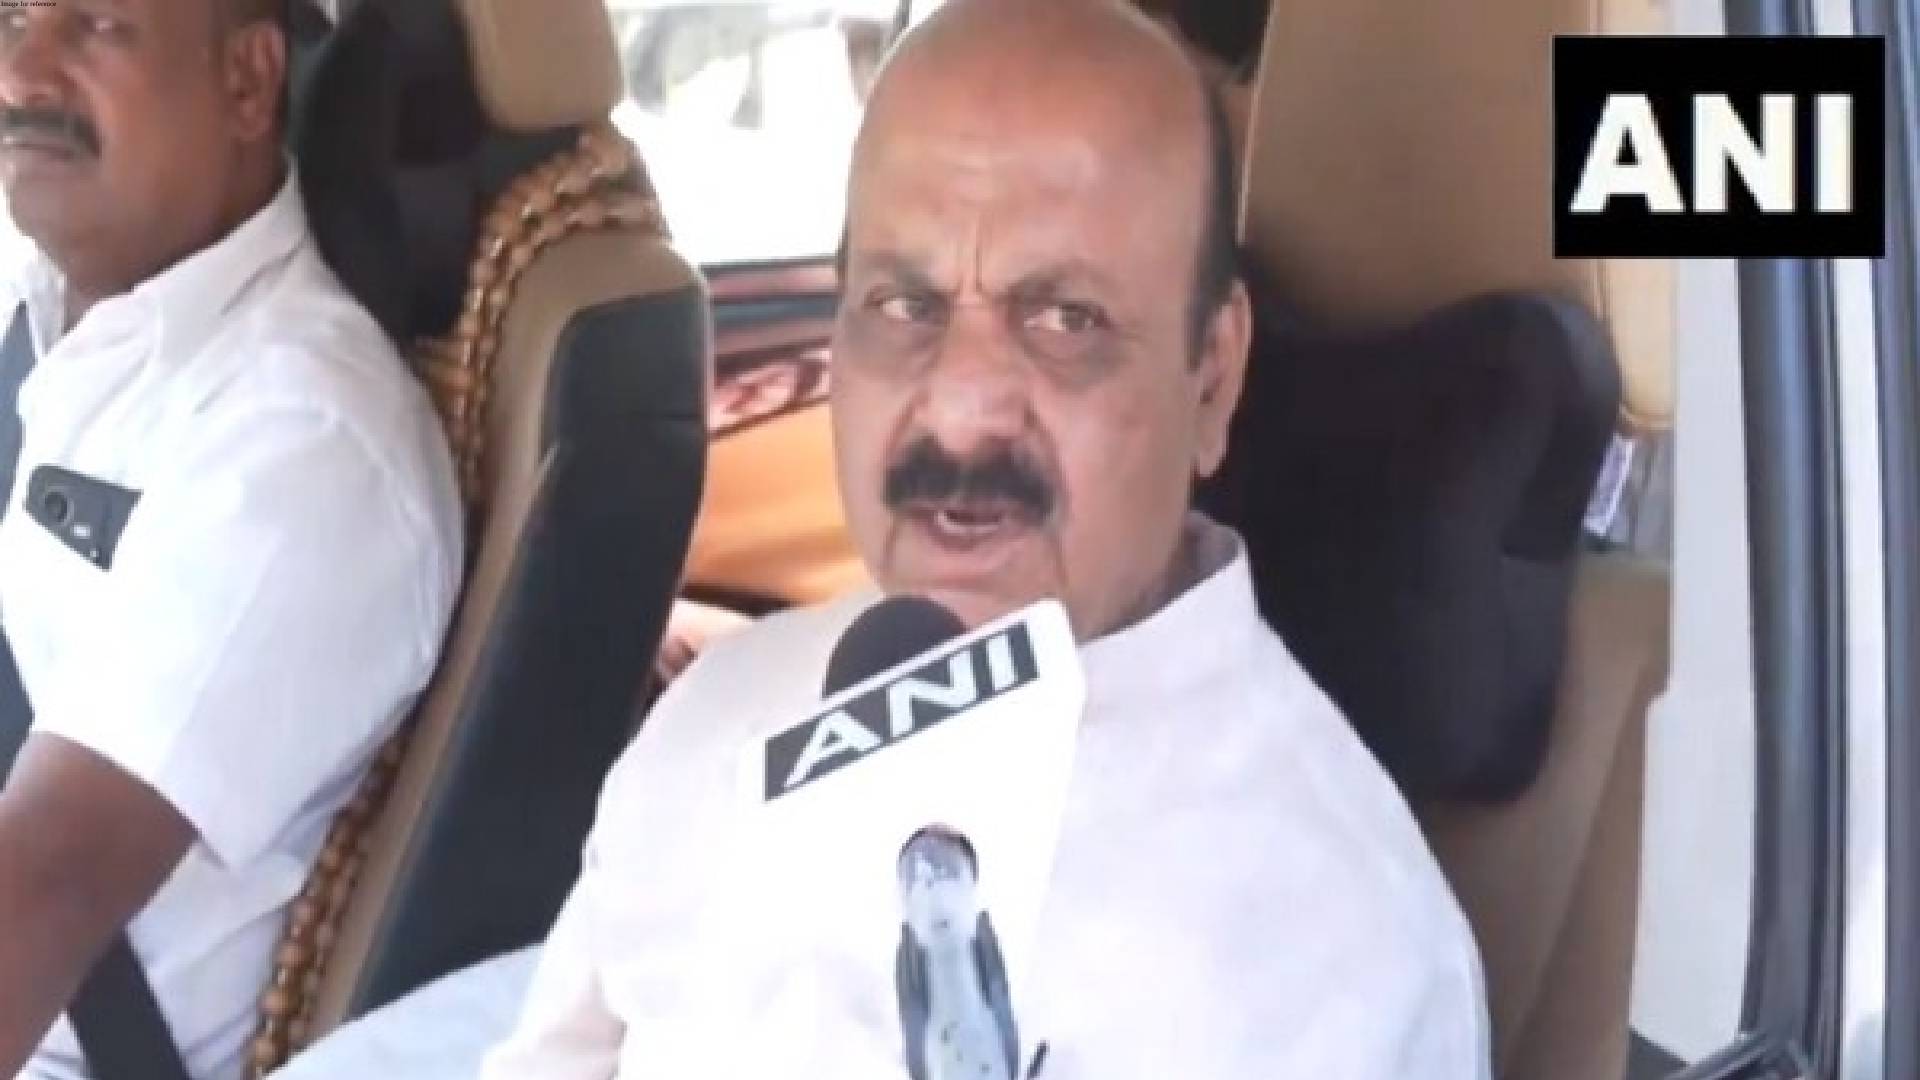 Pro-Pak slogan allegations: BJP accuses Karnataka govt of trying to 'cover up' issue